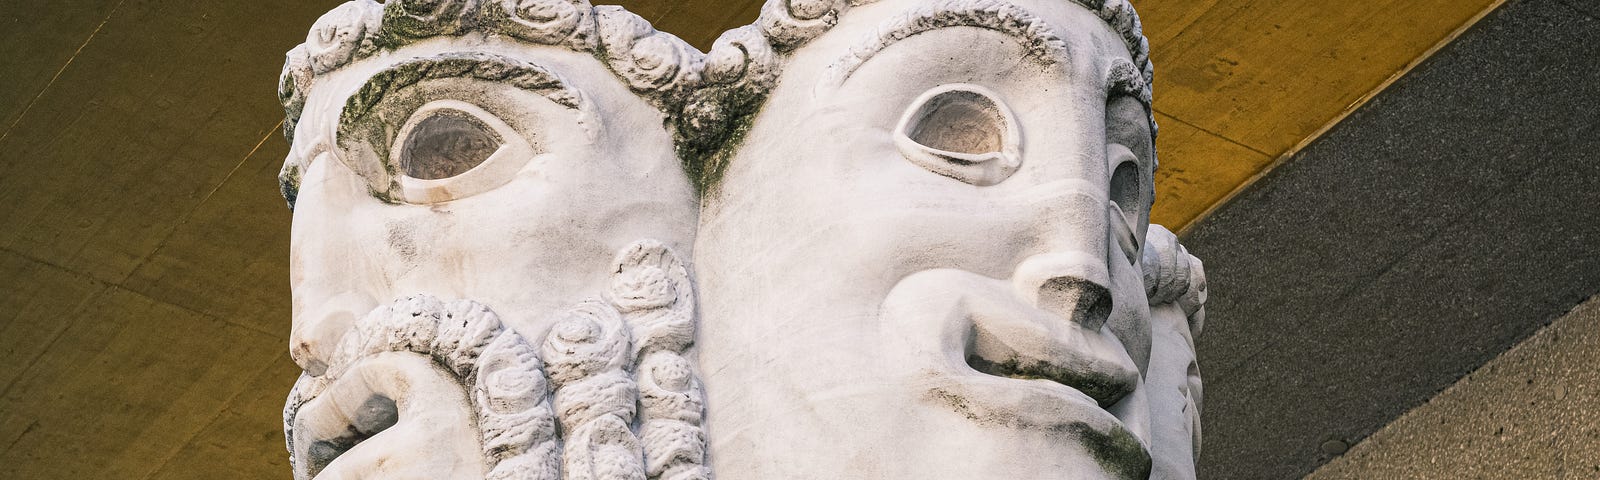 This photo shows two statue heads on a ledge.